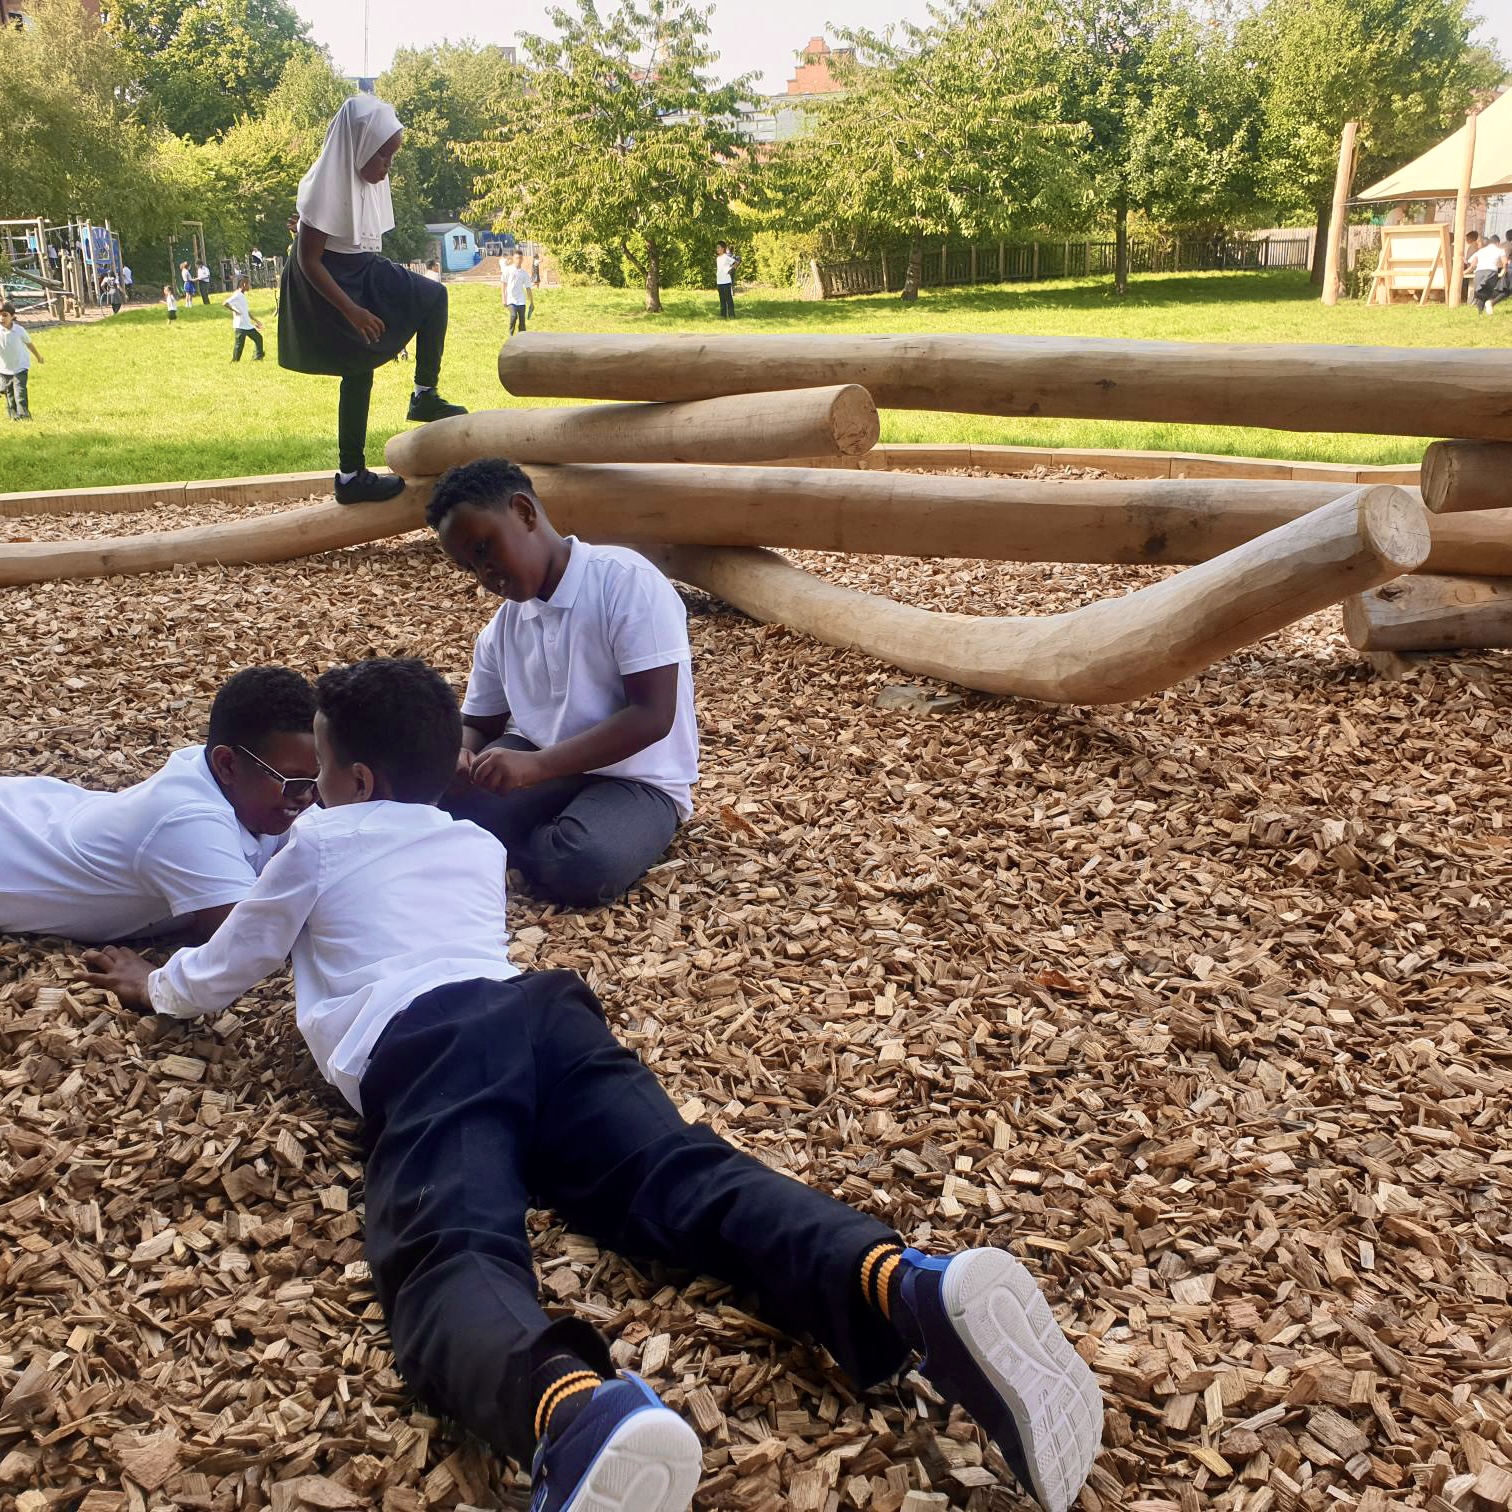 Children sitting and playing on a timber tangle climber play feature